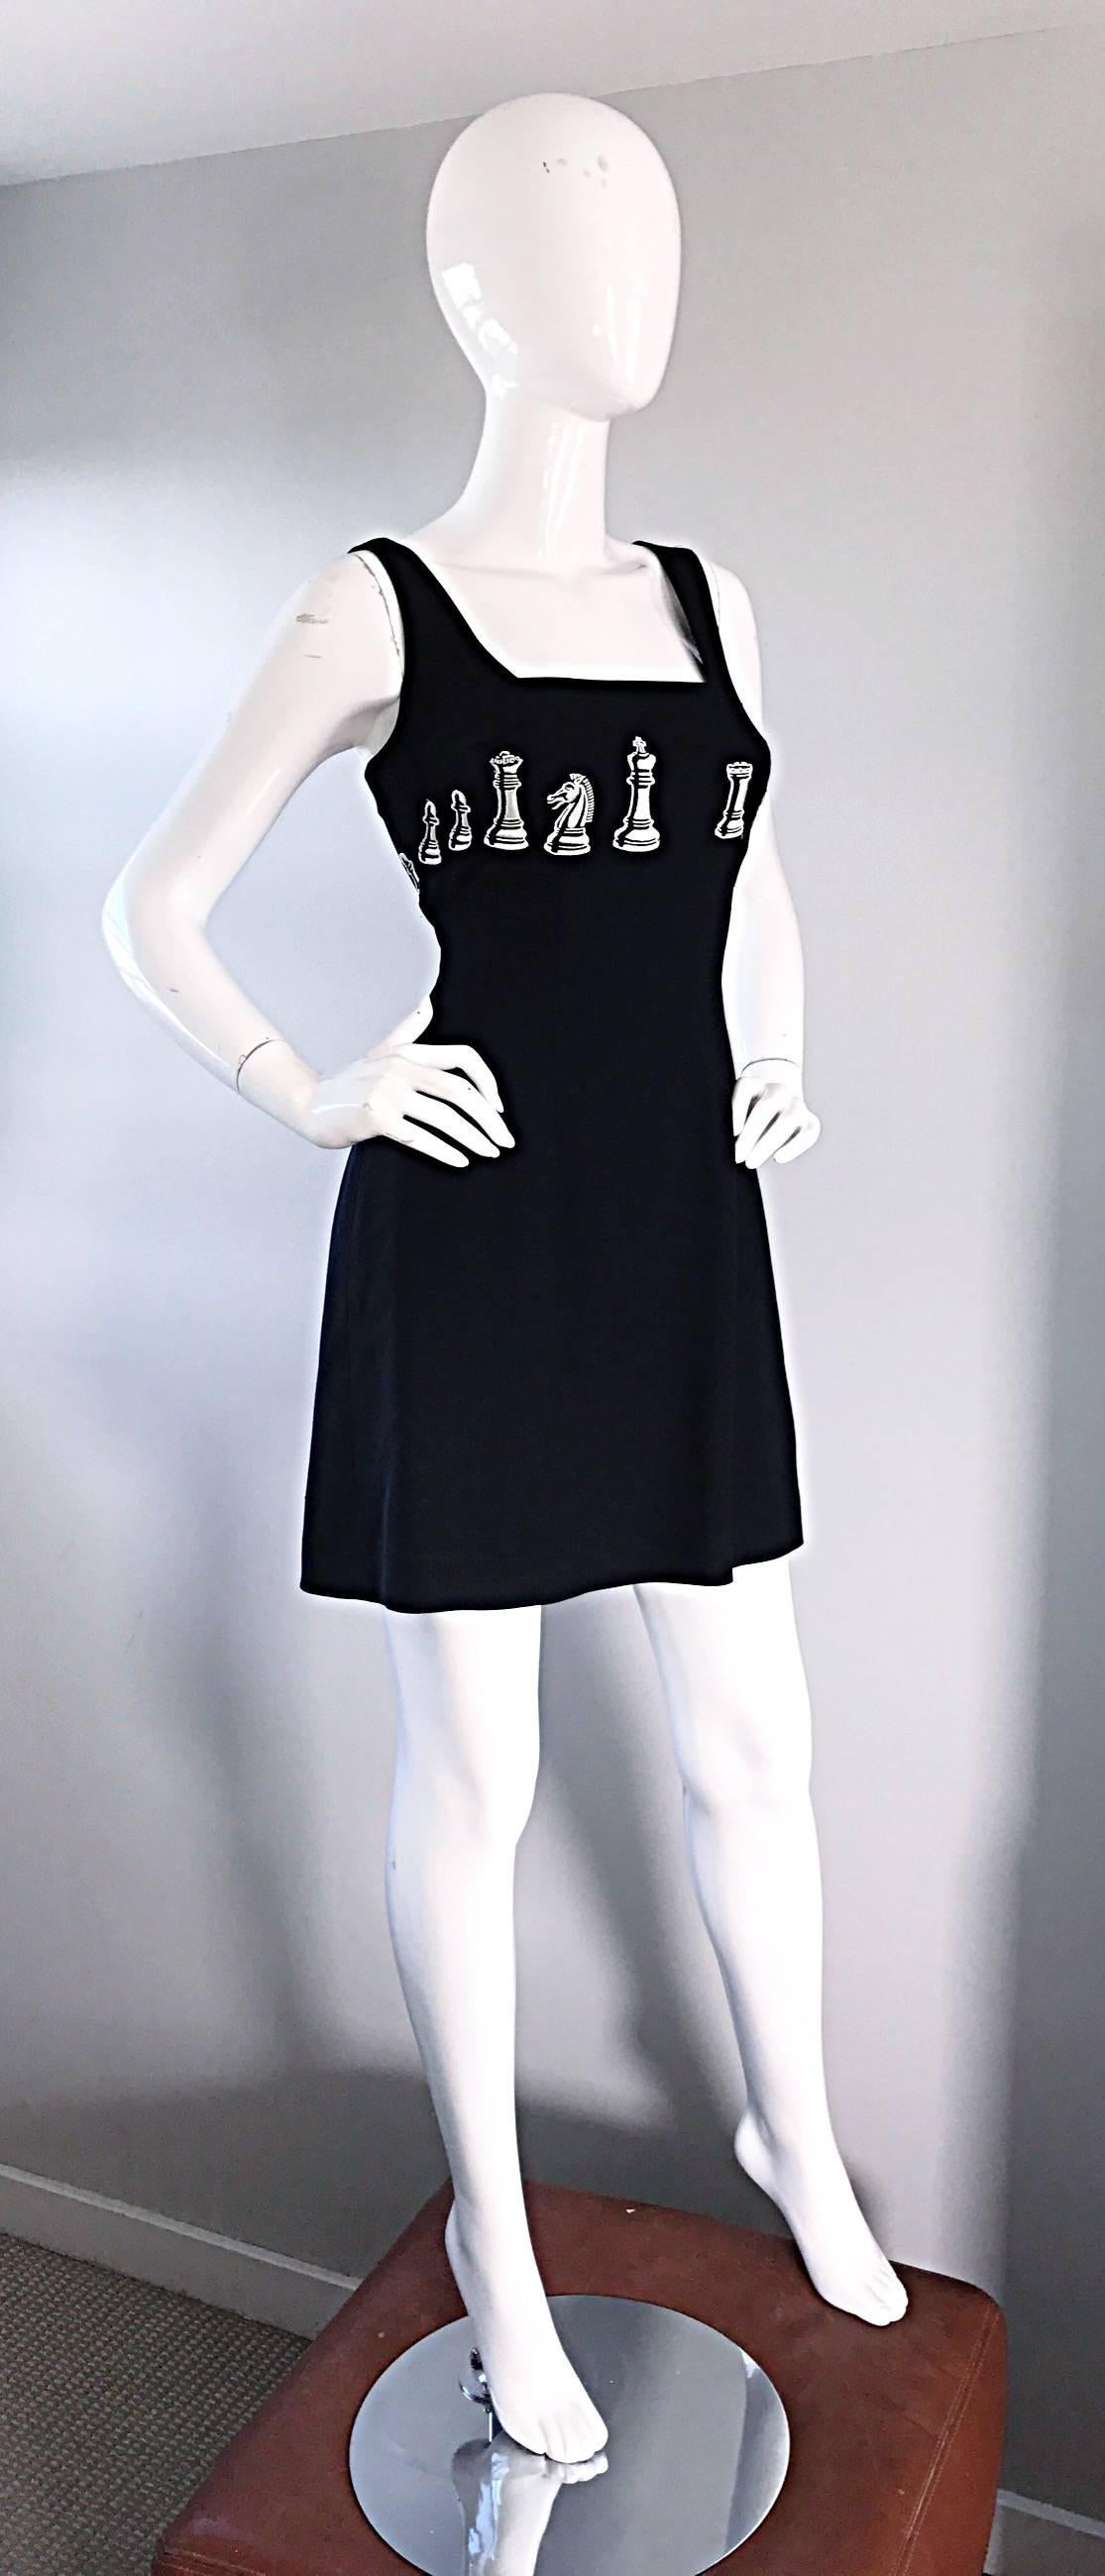 nicole miller embroidered dress